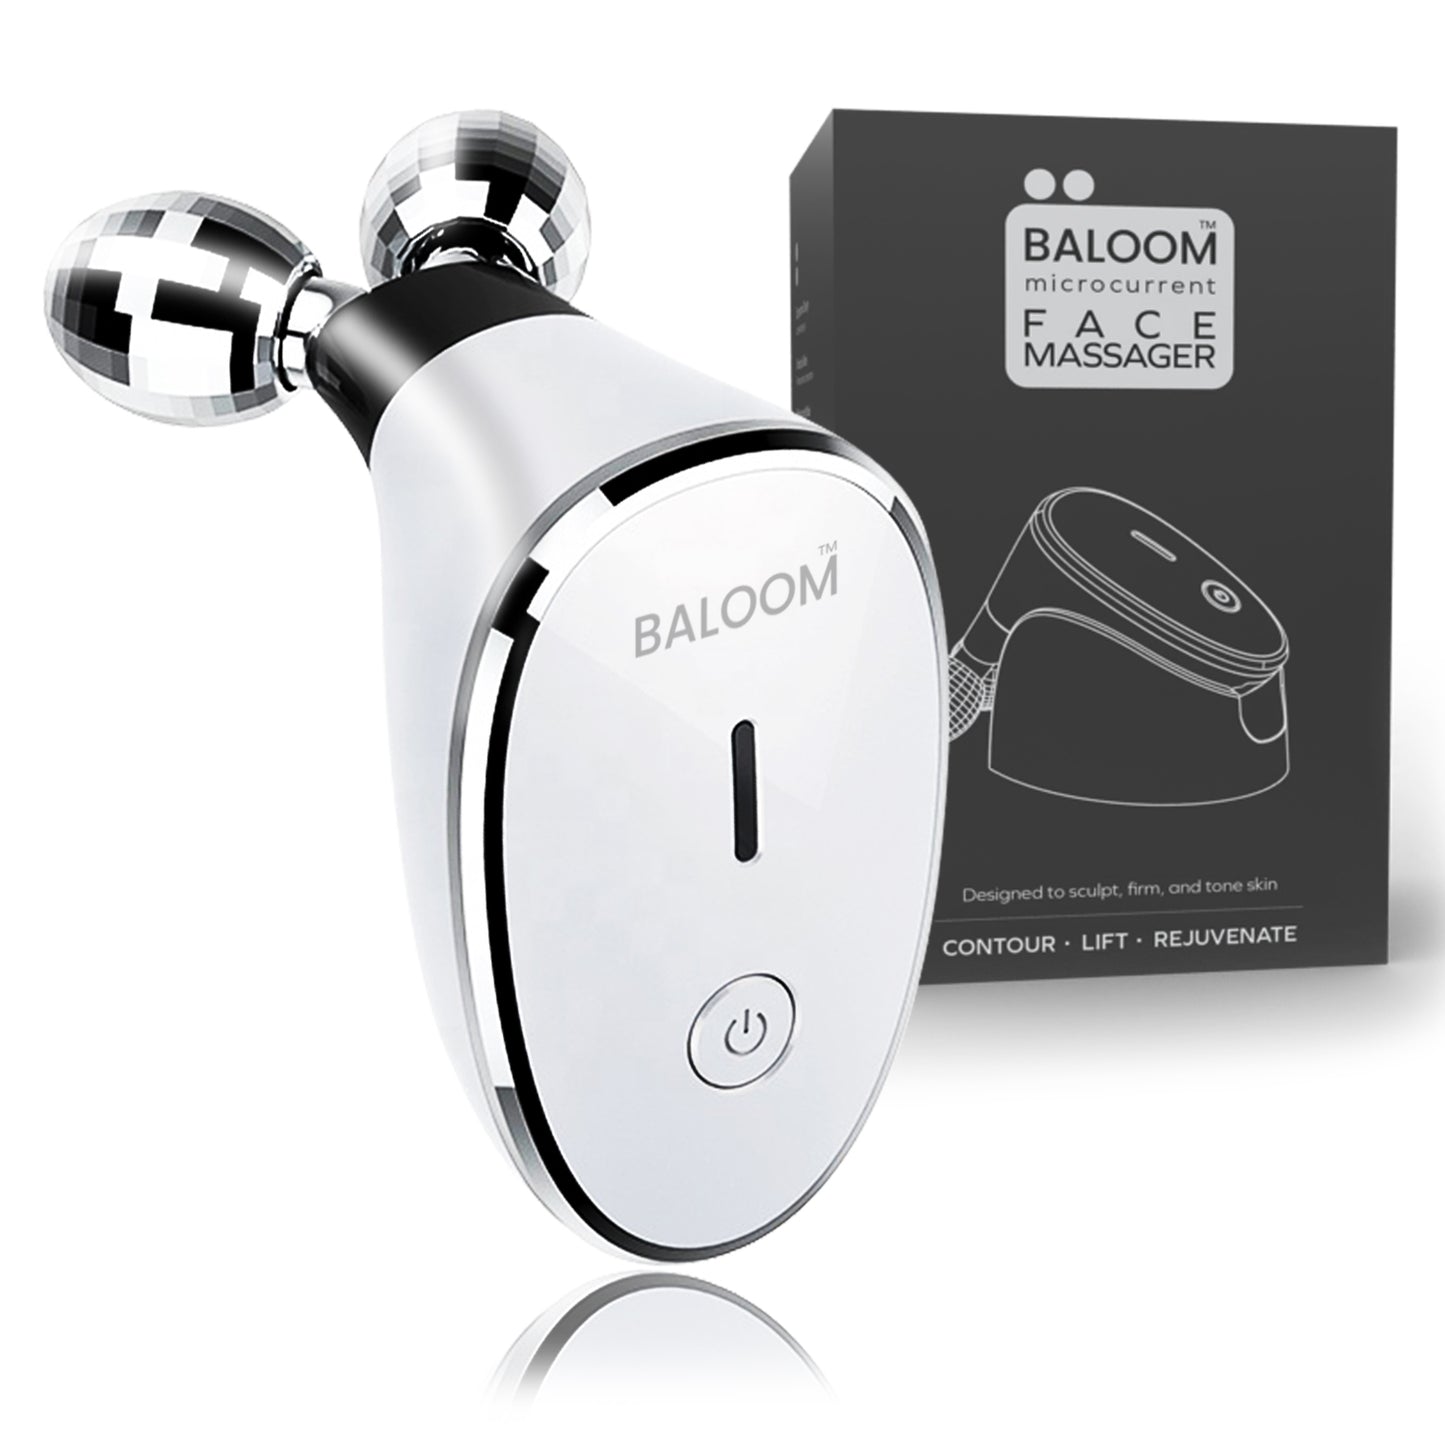 Baloom Microcurrent Face Massager is a handy device for your skincare.